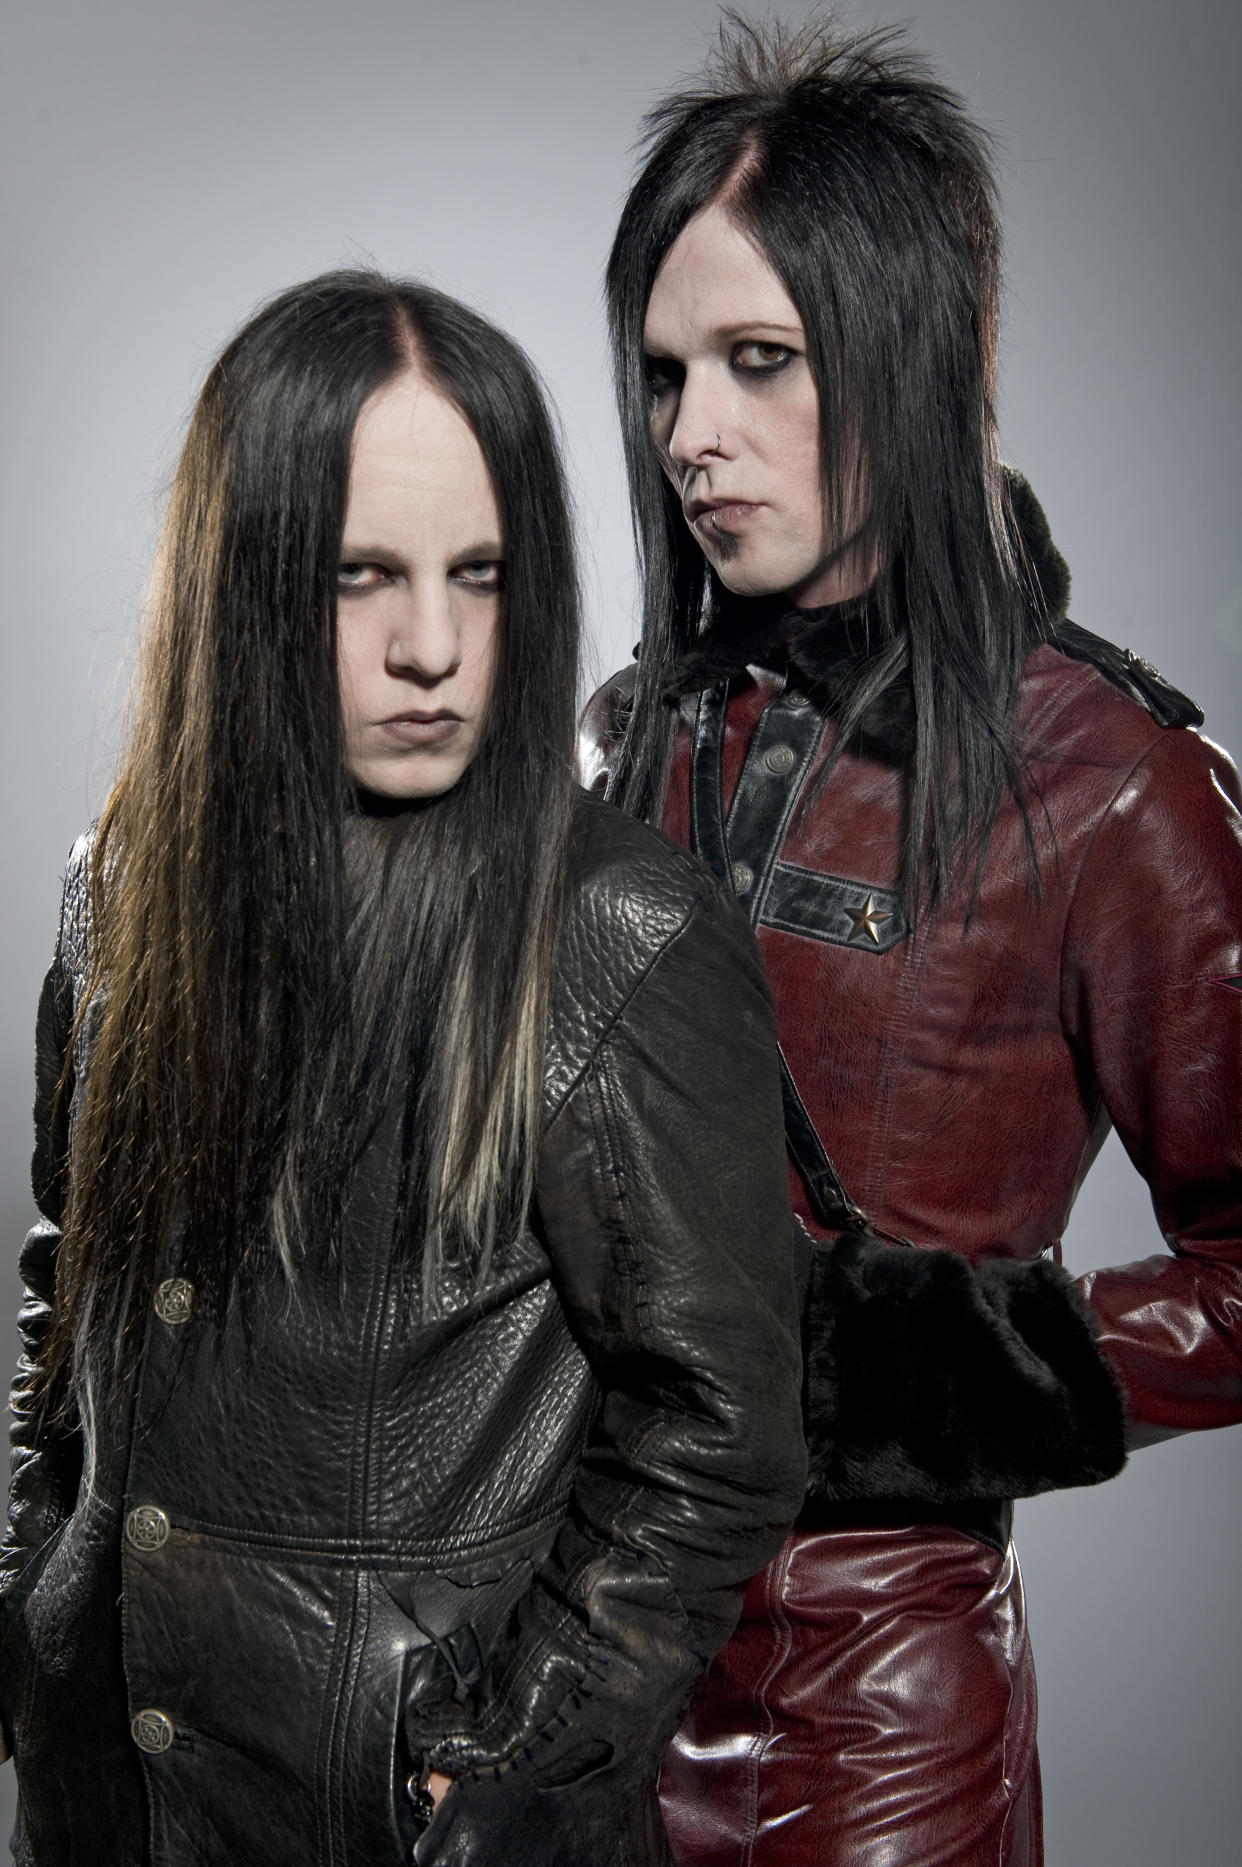 Portrait of Joey Jordison (L) and Wednesday 13 of hard rock group Murderdolls in 2010. (Photo: Rob Monk/Metal Hammer Magazine/Future via Getty Images/Team Rock via Getty Images)